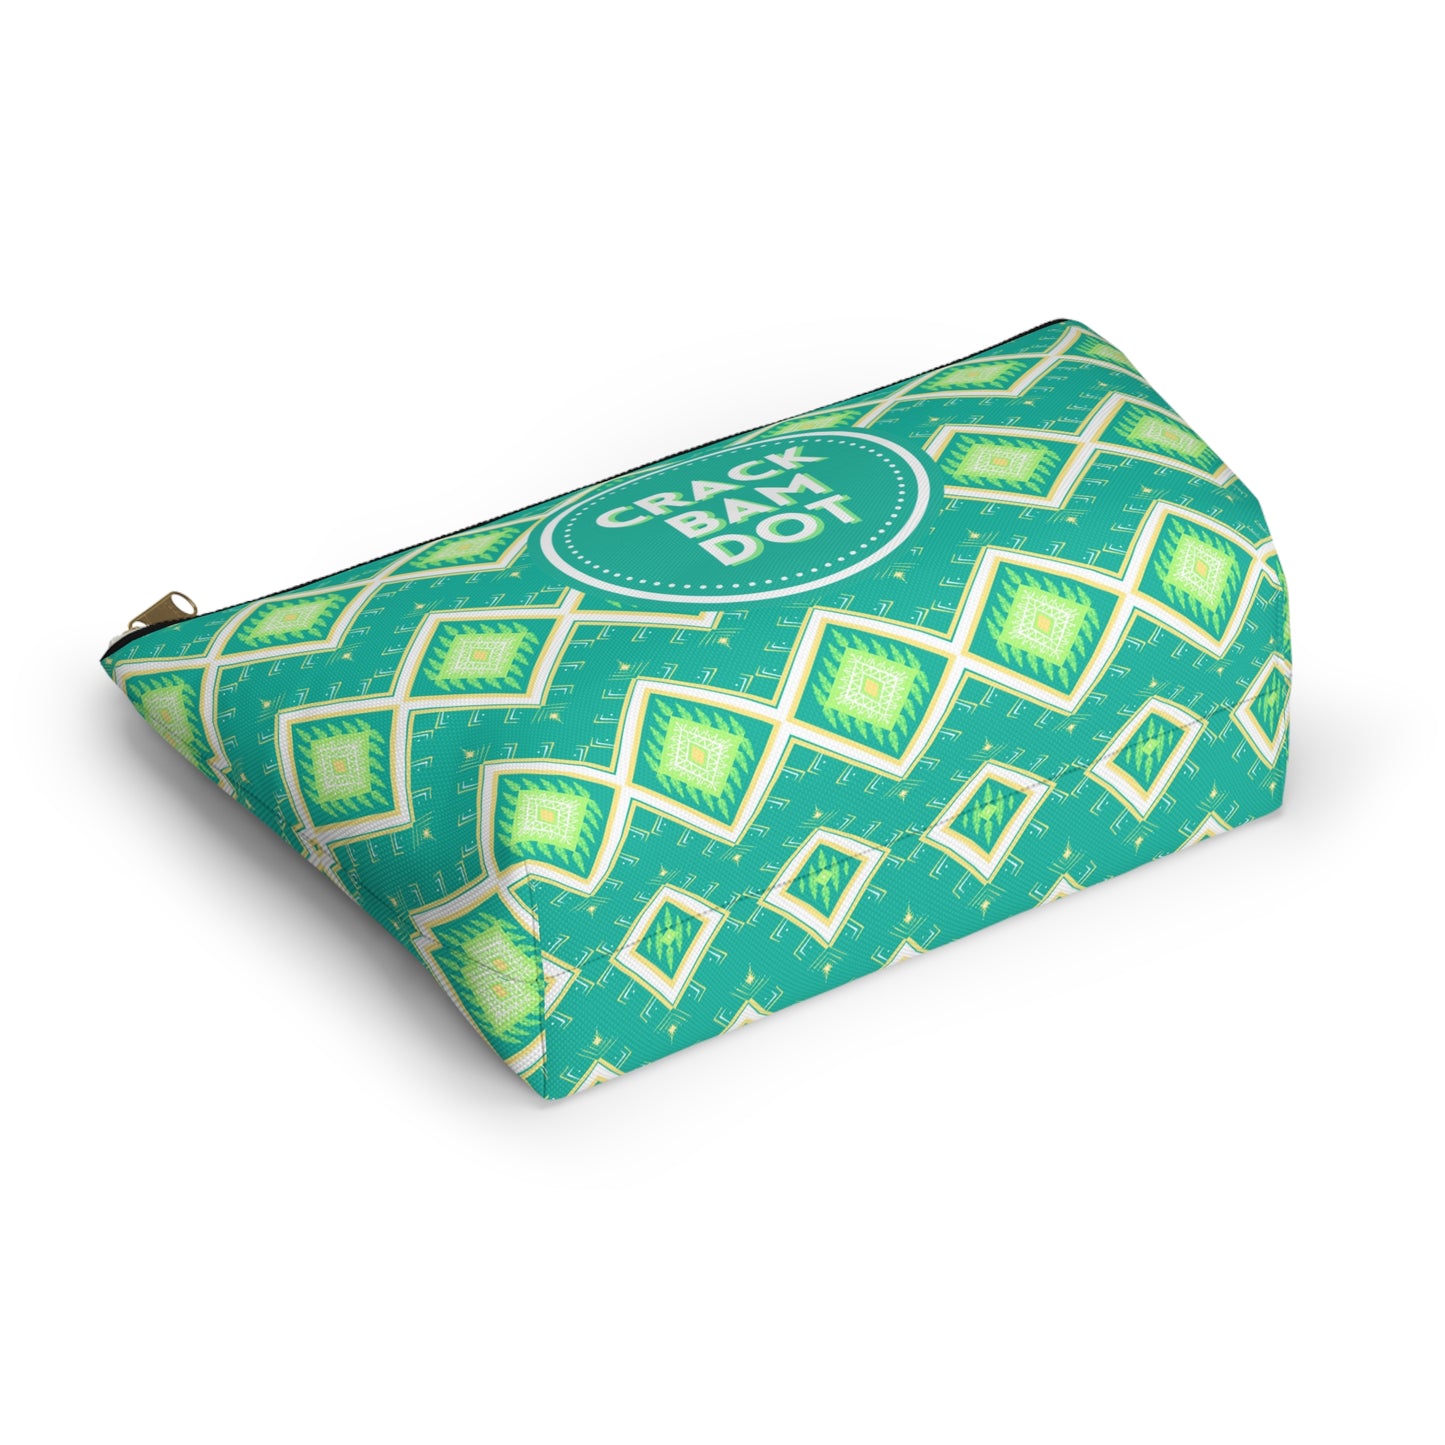 Mahjong Tile & Accessory Bag (T-bottom). Unique Colorful Mahjongg Accessory Pouch Large Enough for Tile Sets. Light Green Tribal Pattern.